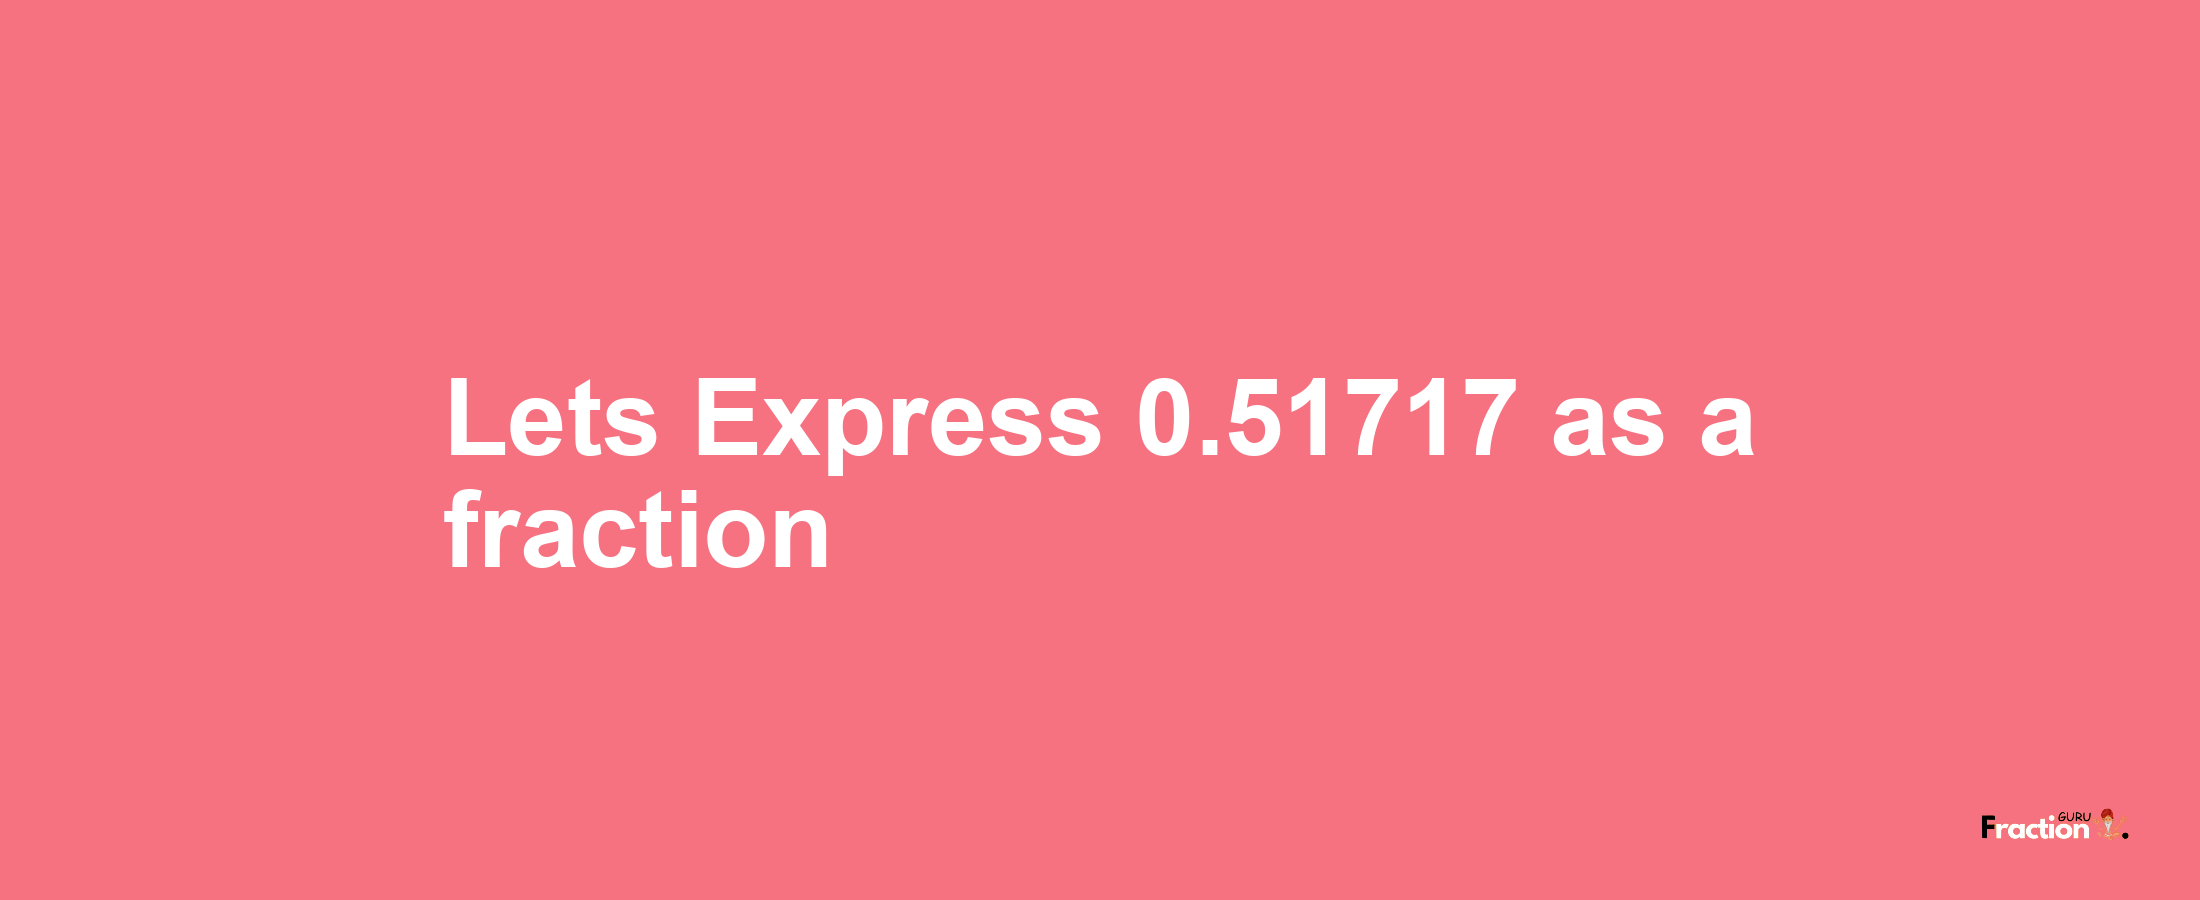 Lets Express 0.51717 as afraction